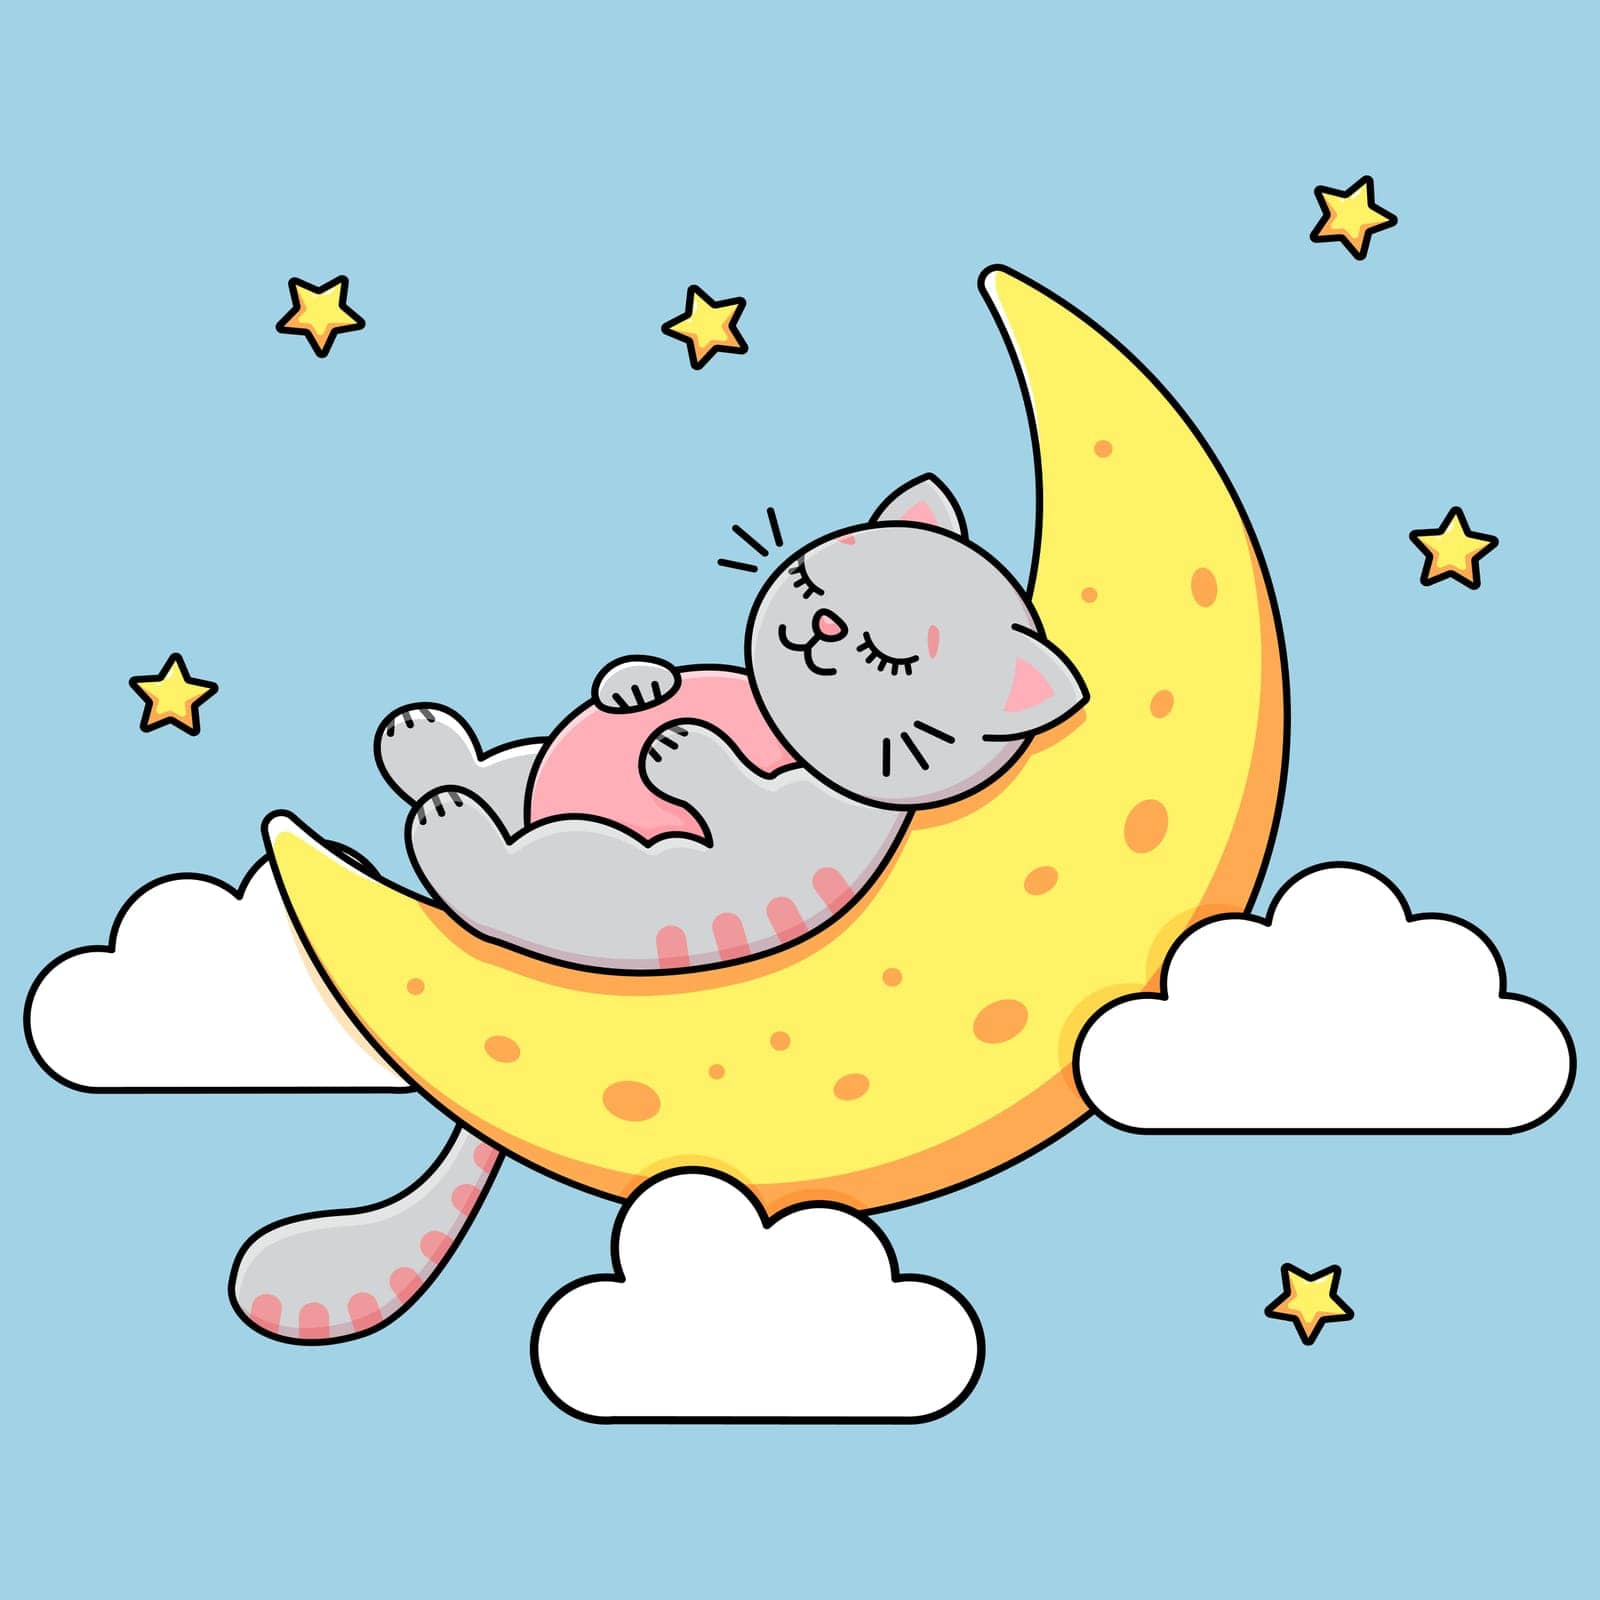 The gray cat sleeps on the moon. Sky stars and clouds. Childrens print. Vector illustration